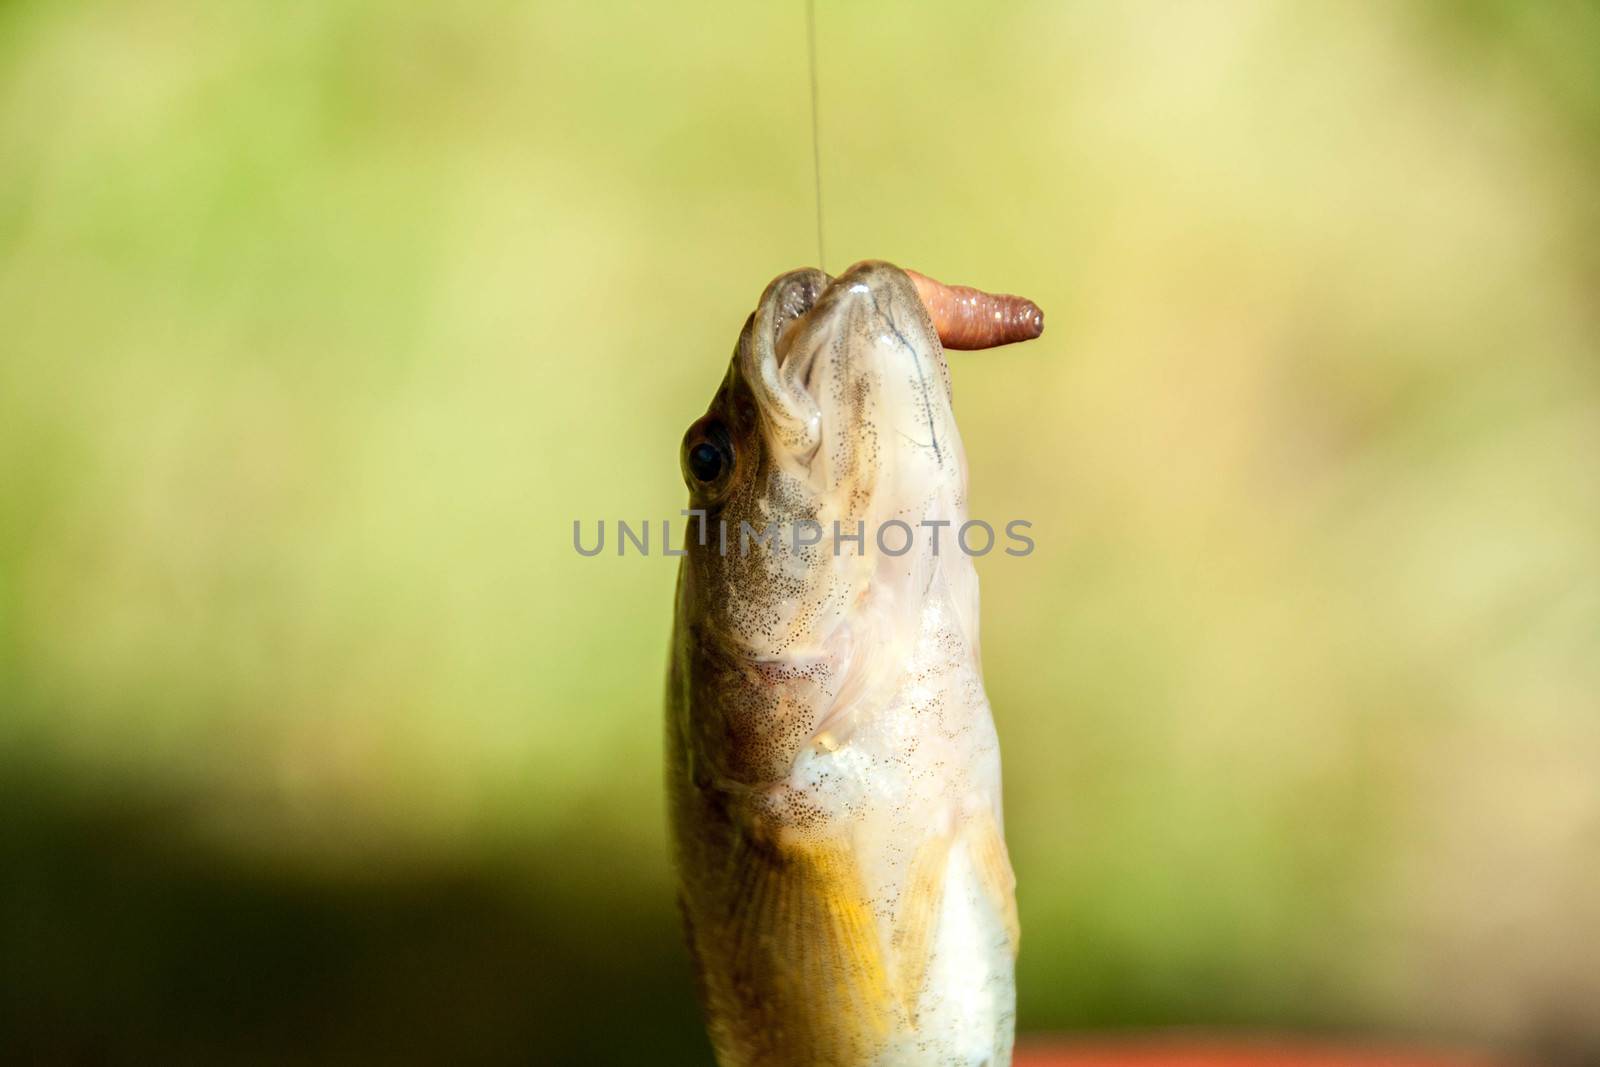  fish on a hook  by alexx60